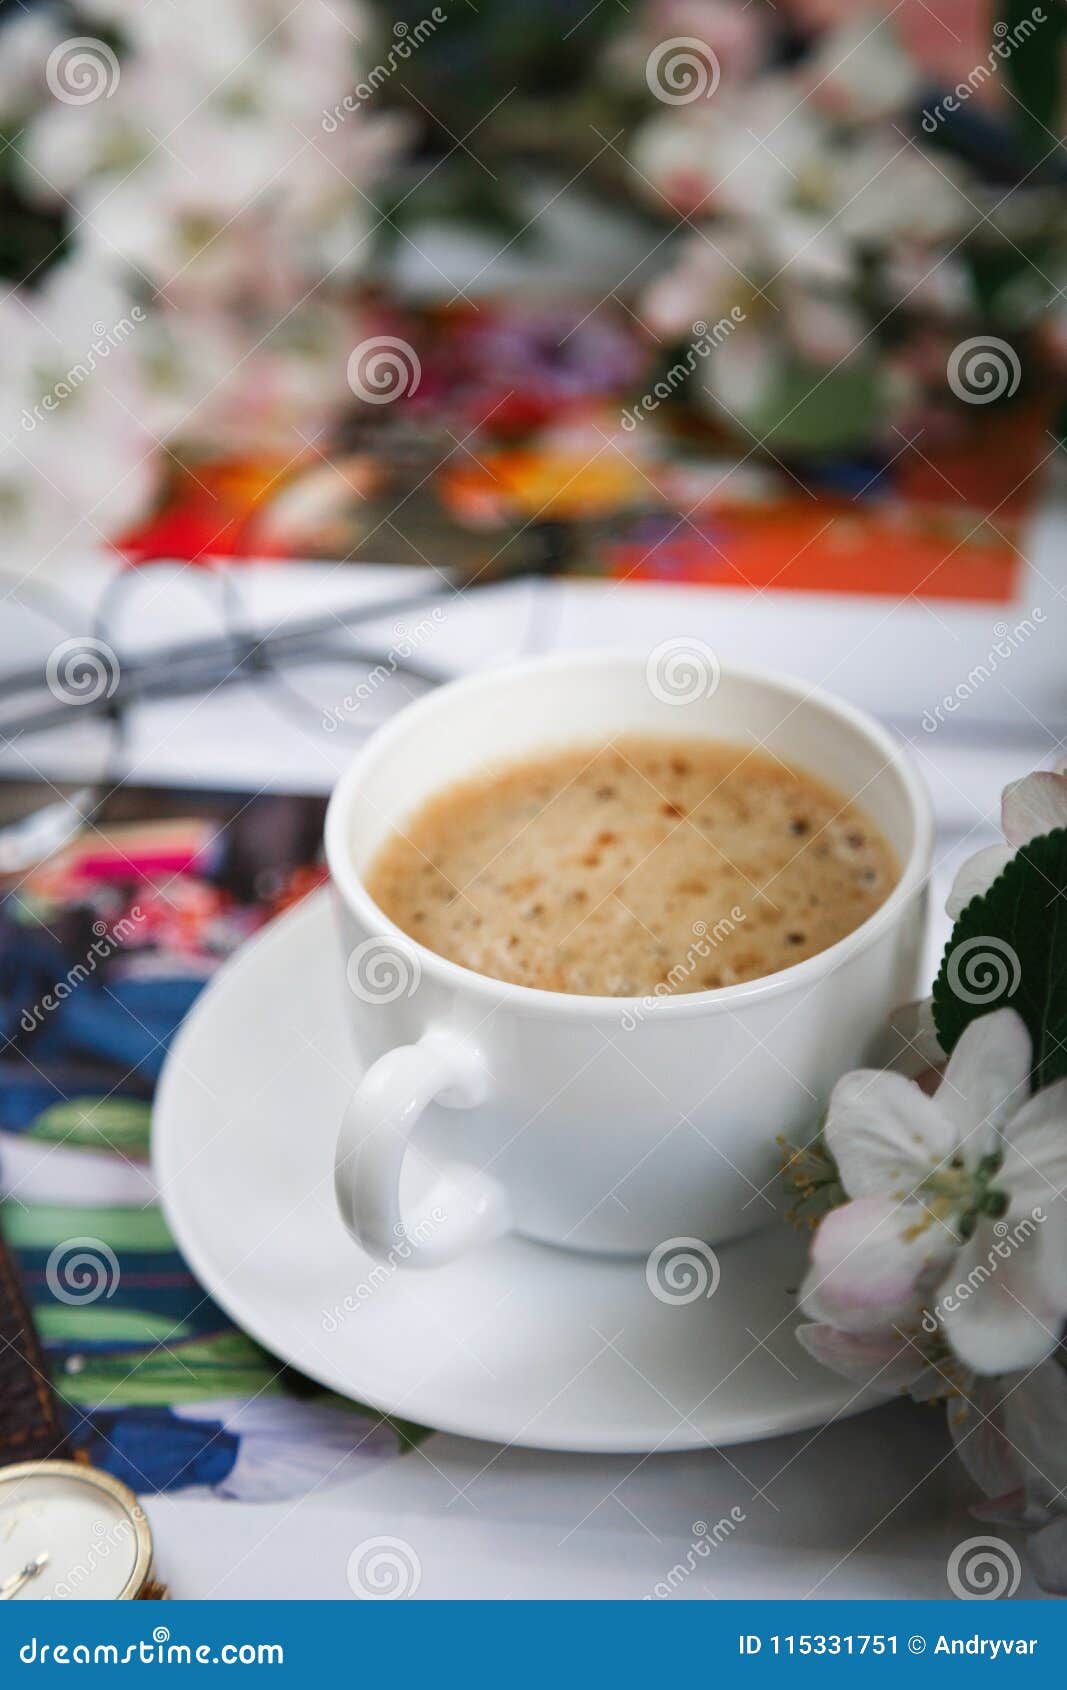 Cup Of Morning Coffee With Flowers Stock Image Image Of Blue Fresh 115331751